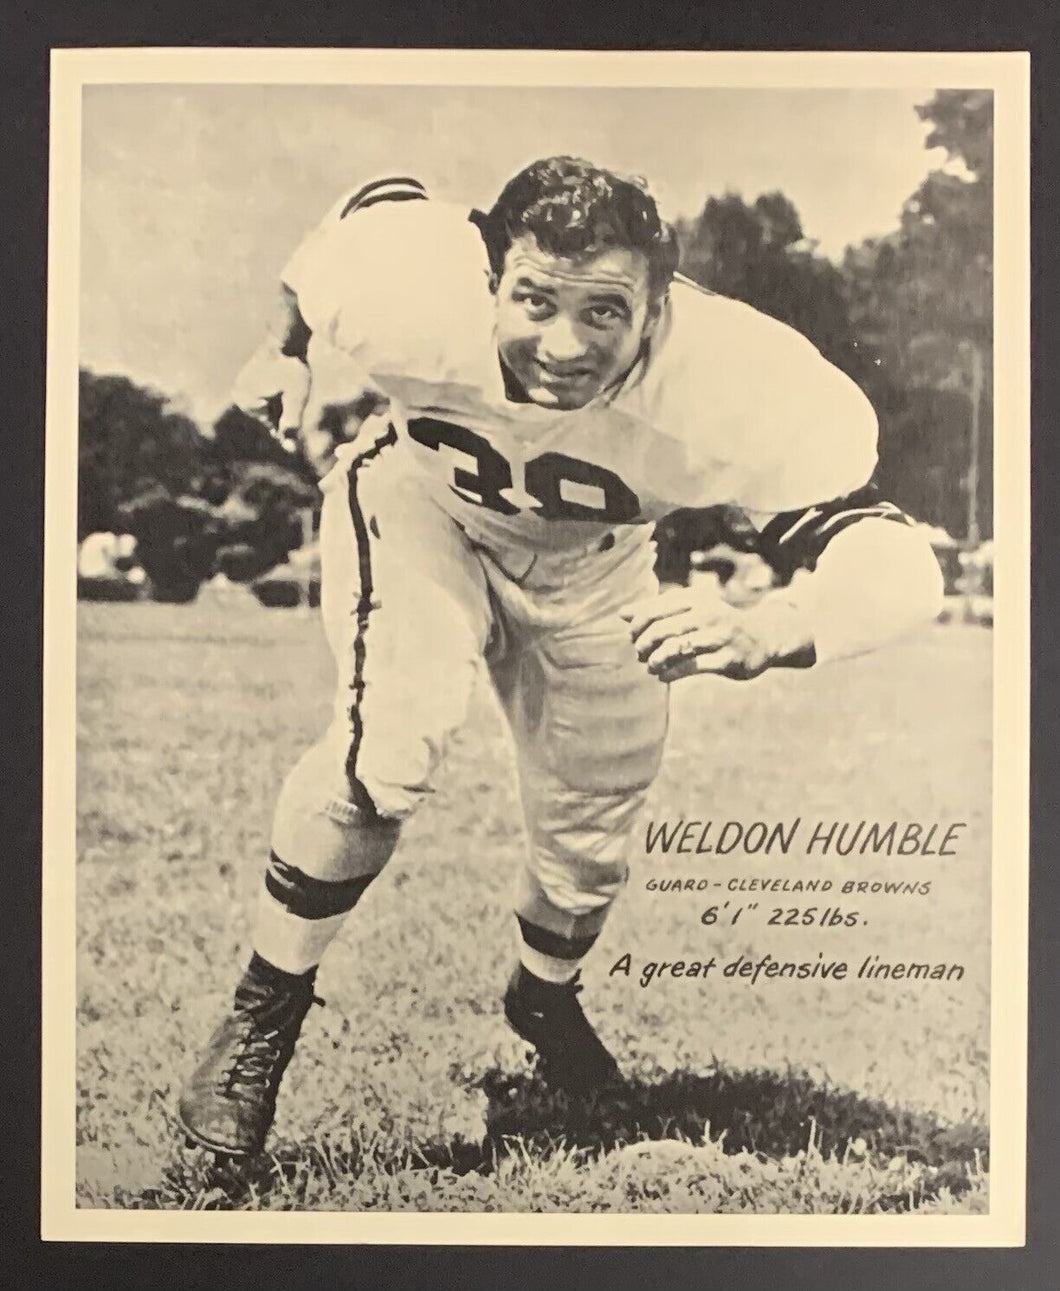 1949 Cleveland Browns NFL Football Team Issued Photo Player Weldon Humble